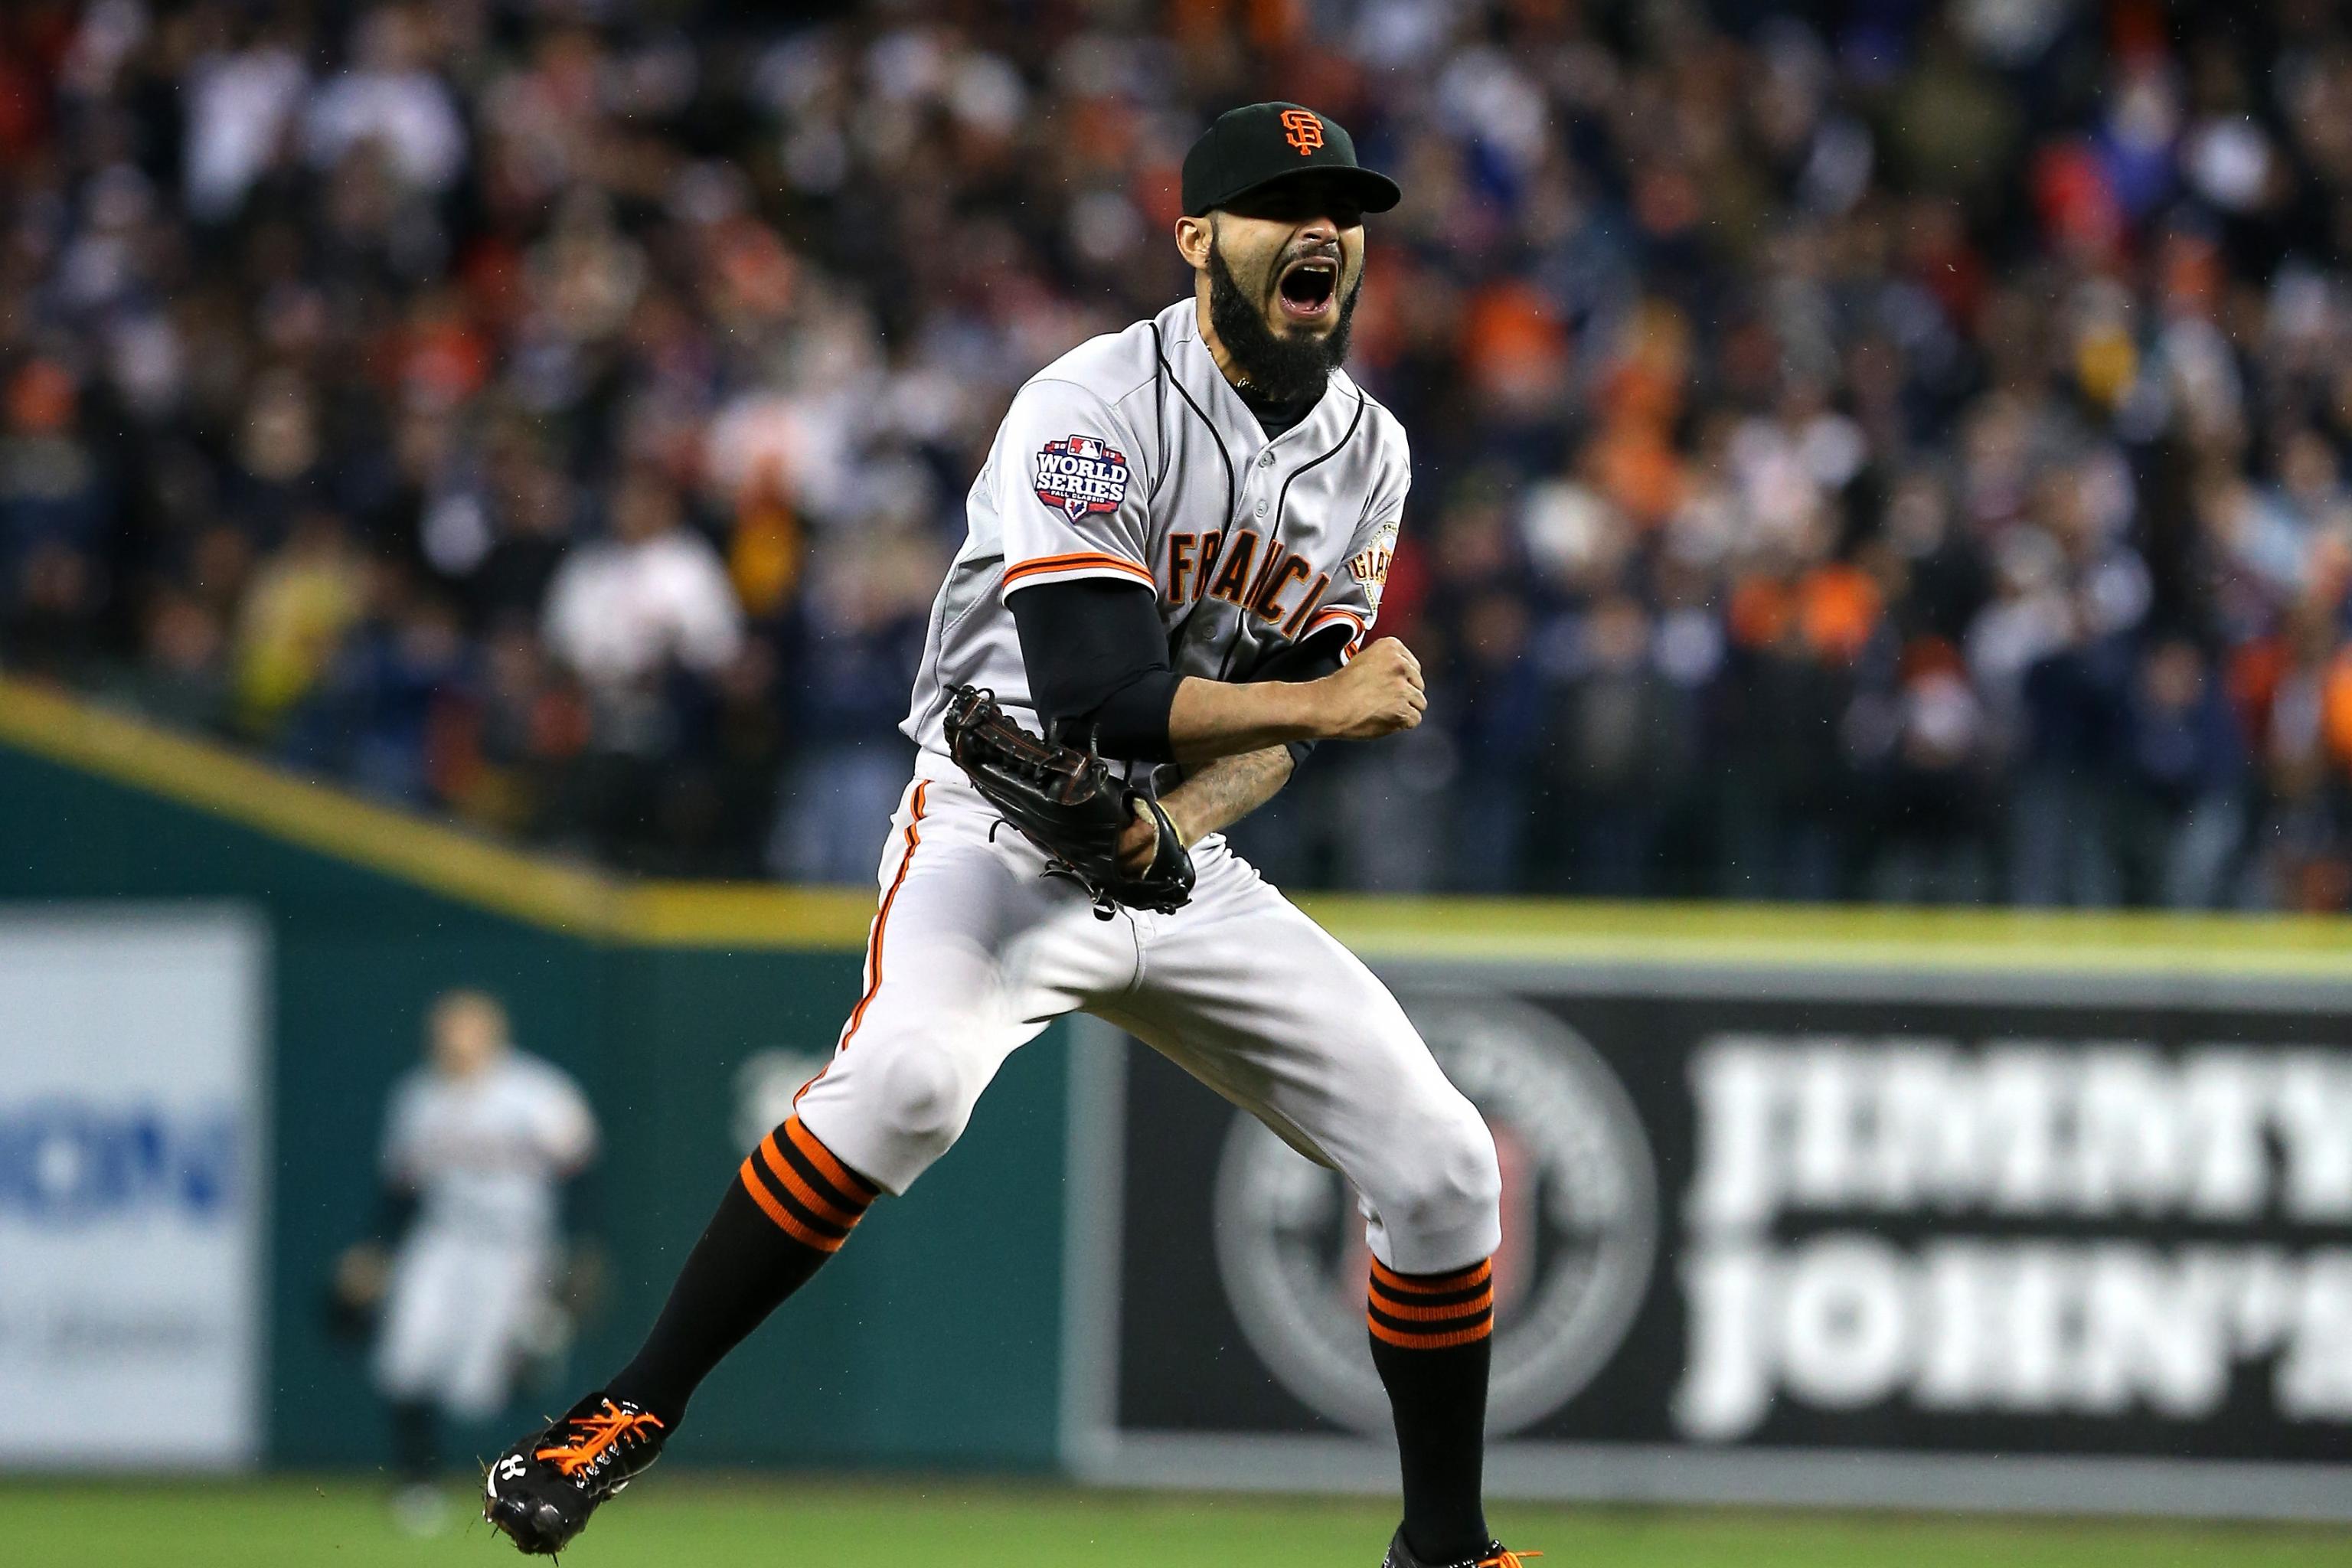 Sergio Romo: Will He Last as the San Francisco Giants' Full-Time